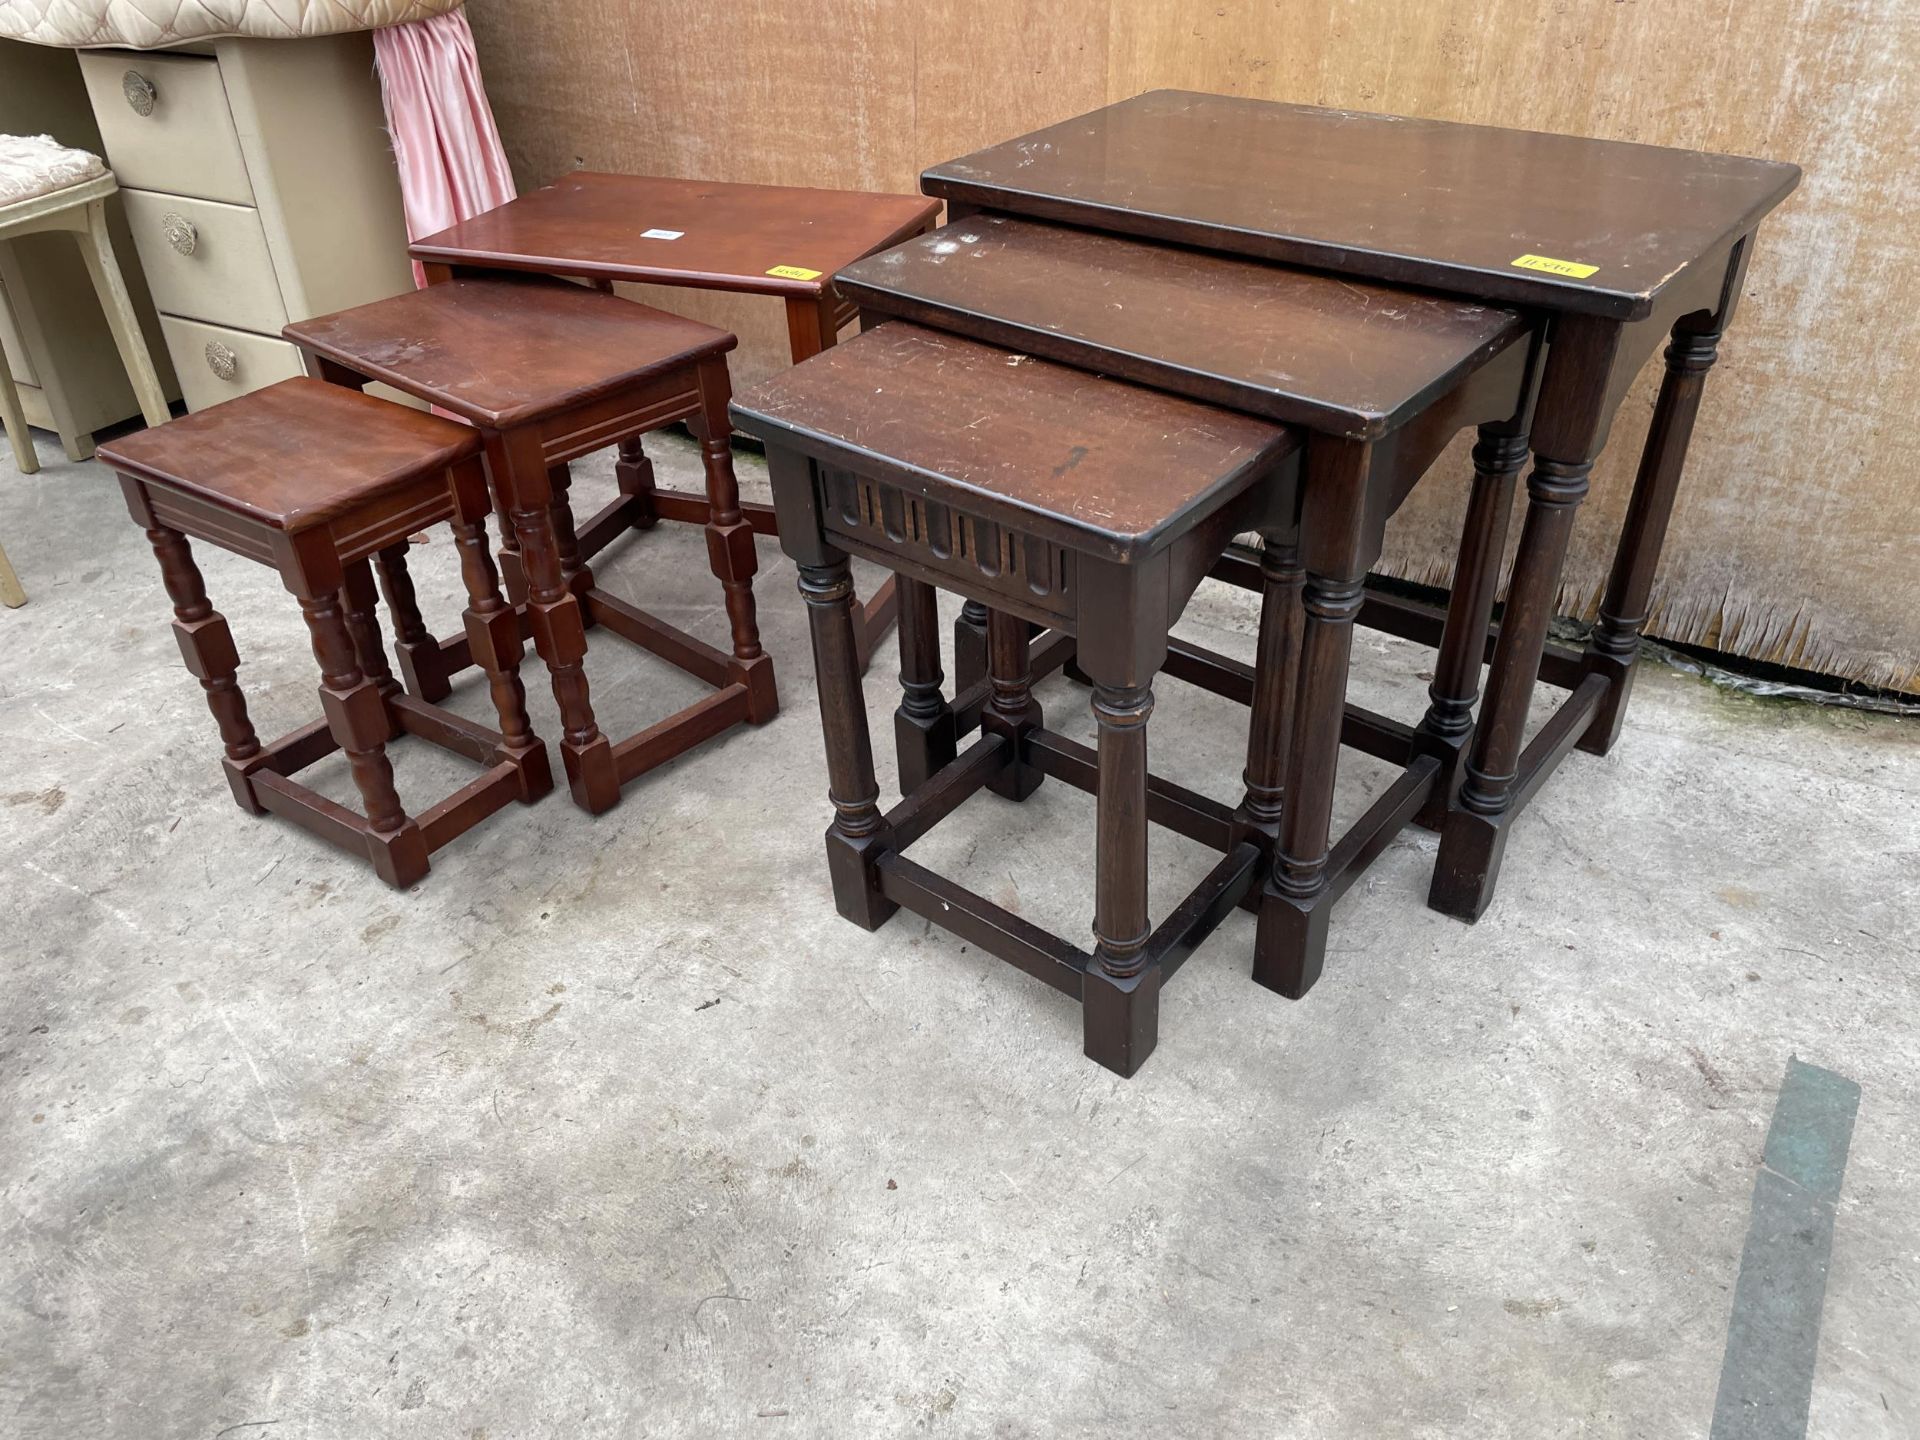 TWO MODERN NEST OF THREE TABLES - Image 2 of 2